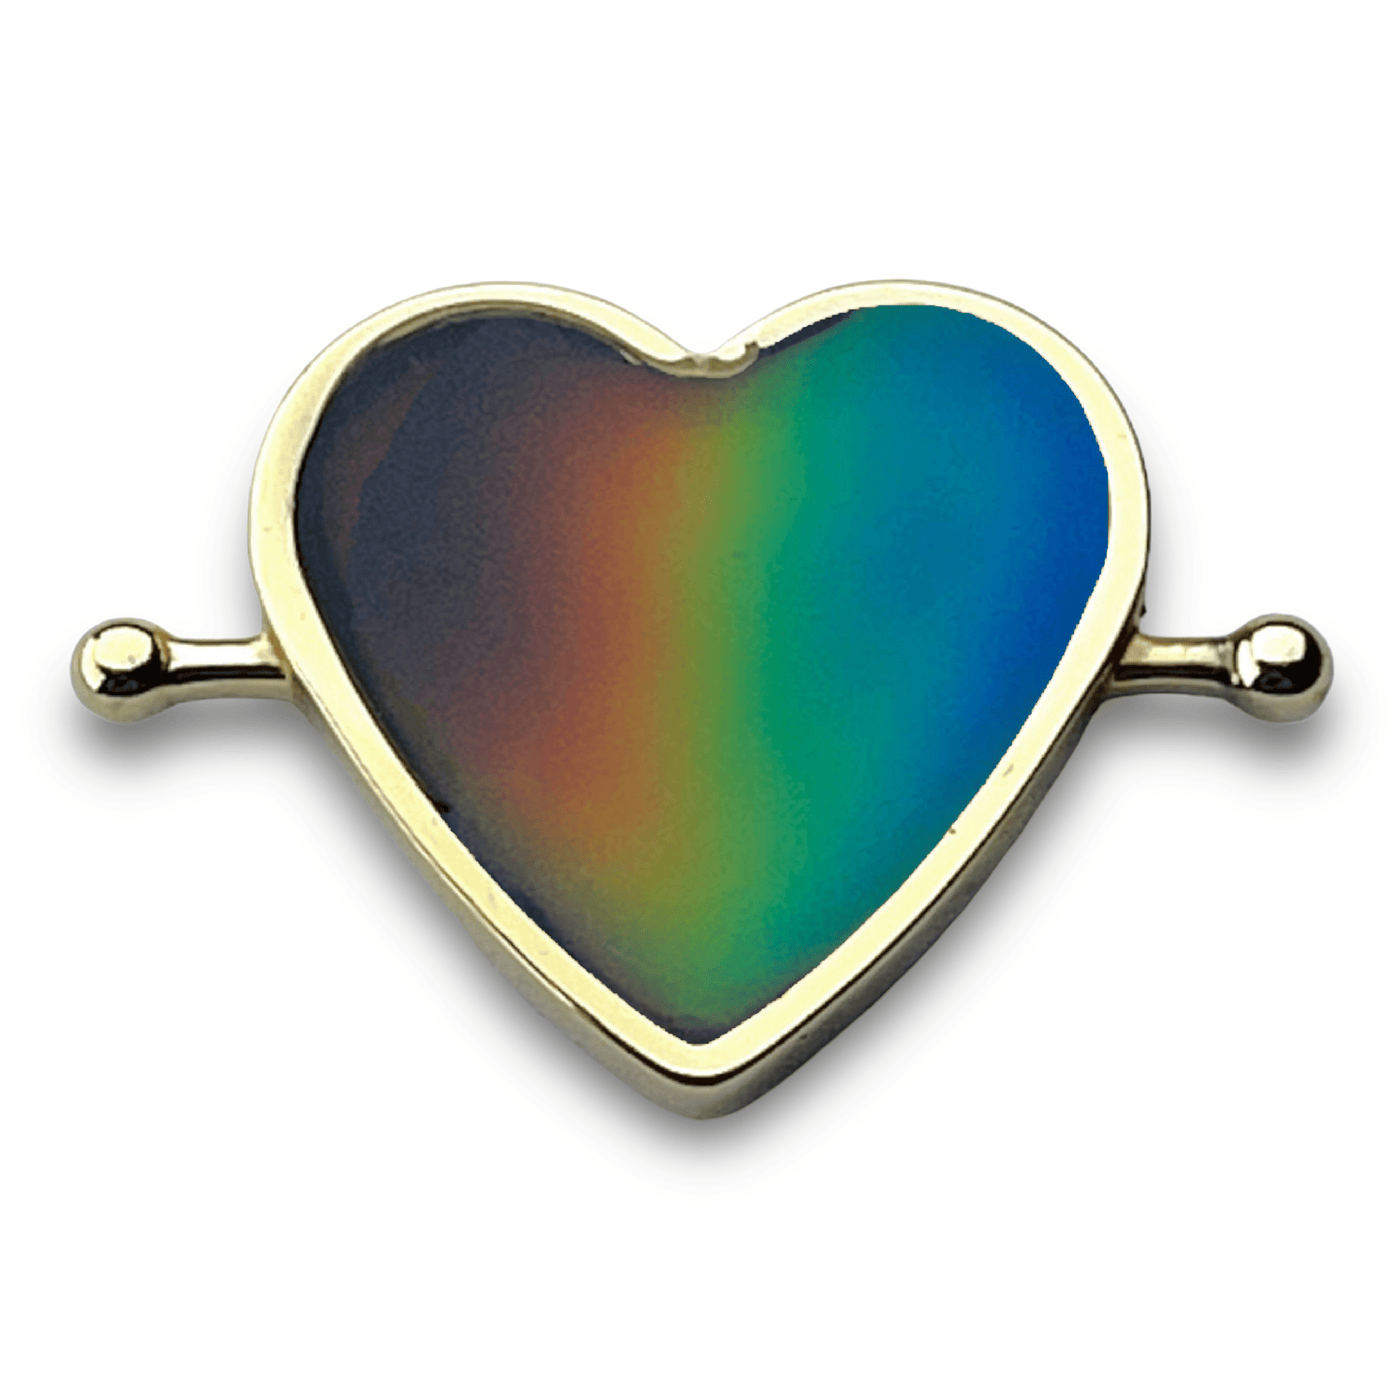 Mood Heart-shaped Element (color changing)